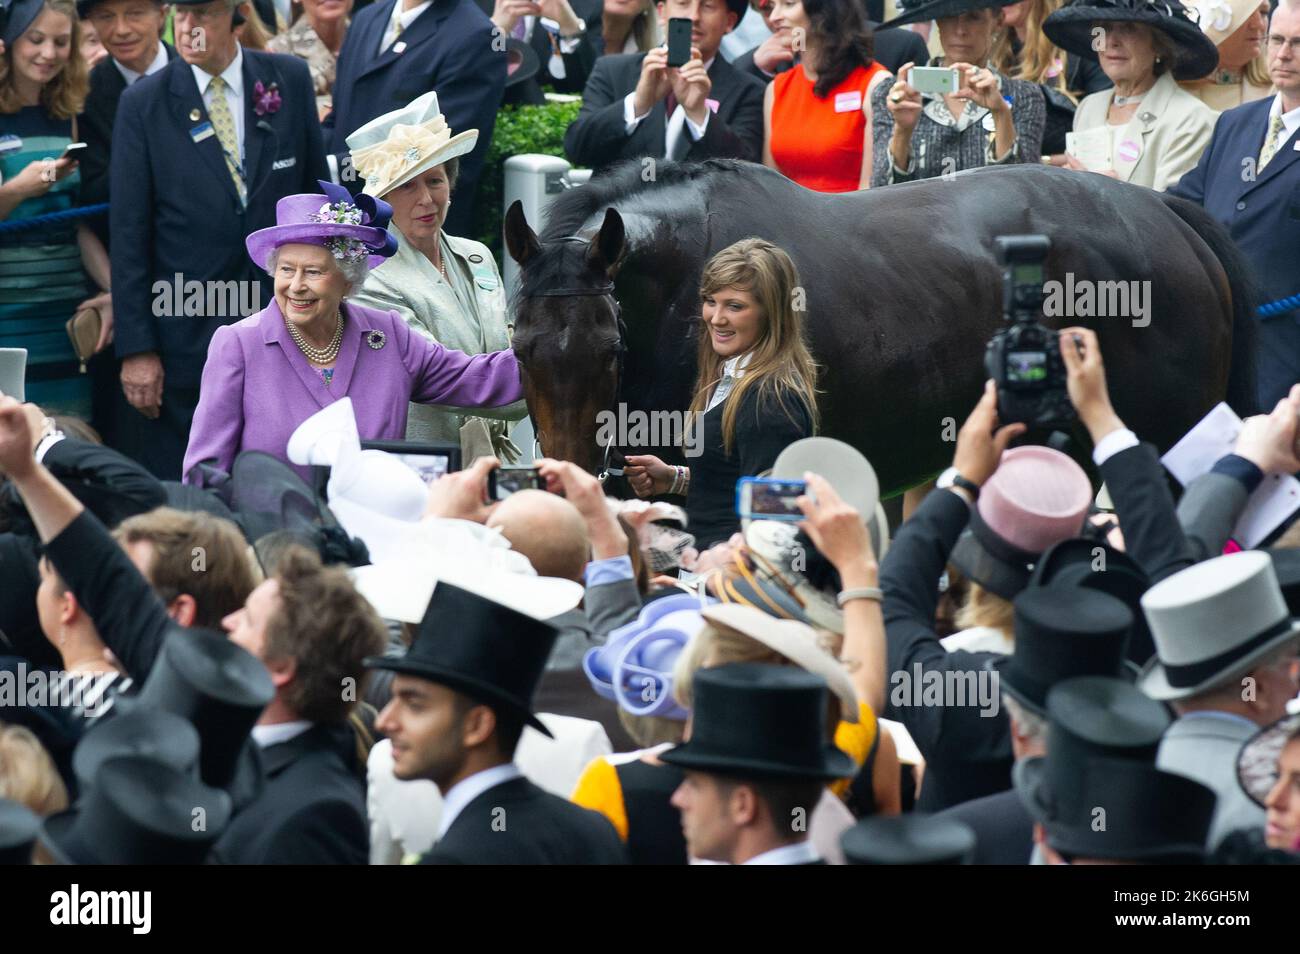 Ascot, Berkshire, UK. 20th June, 2013. Her Majesty the Queen and her daughter Princess Anne have a photo with the Queen's winning horse Estimate. This was an historic day as it was the first time a reigning monarch had won the Gold Cup. Estimate was ridden by jockey Ryan Moore. Queen Elizabeth II was due to the presentation for the Gold Cup but her son, the Duke of York did the presentation instead. Issue Date: 14th October 2022. Credit: Maureen McLean/Alamy Stock Photo